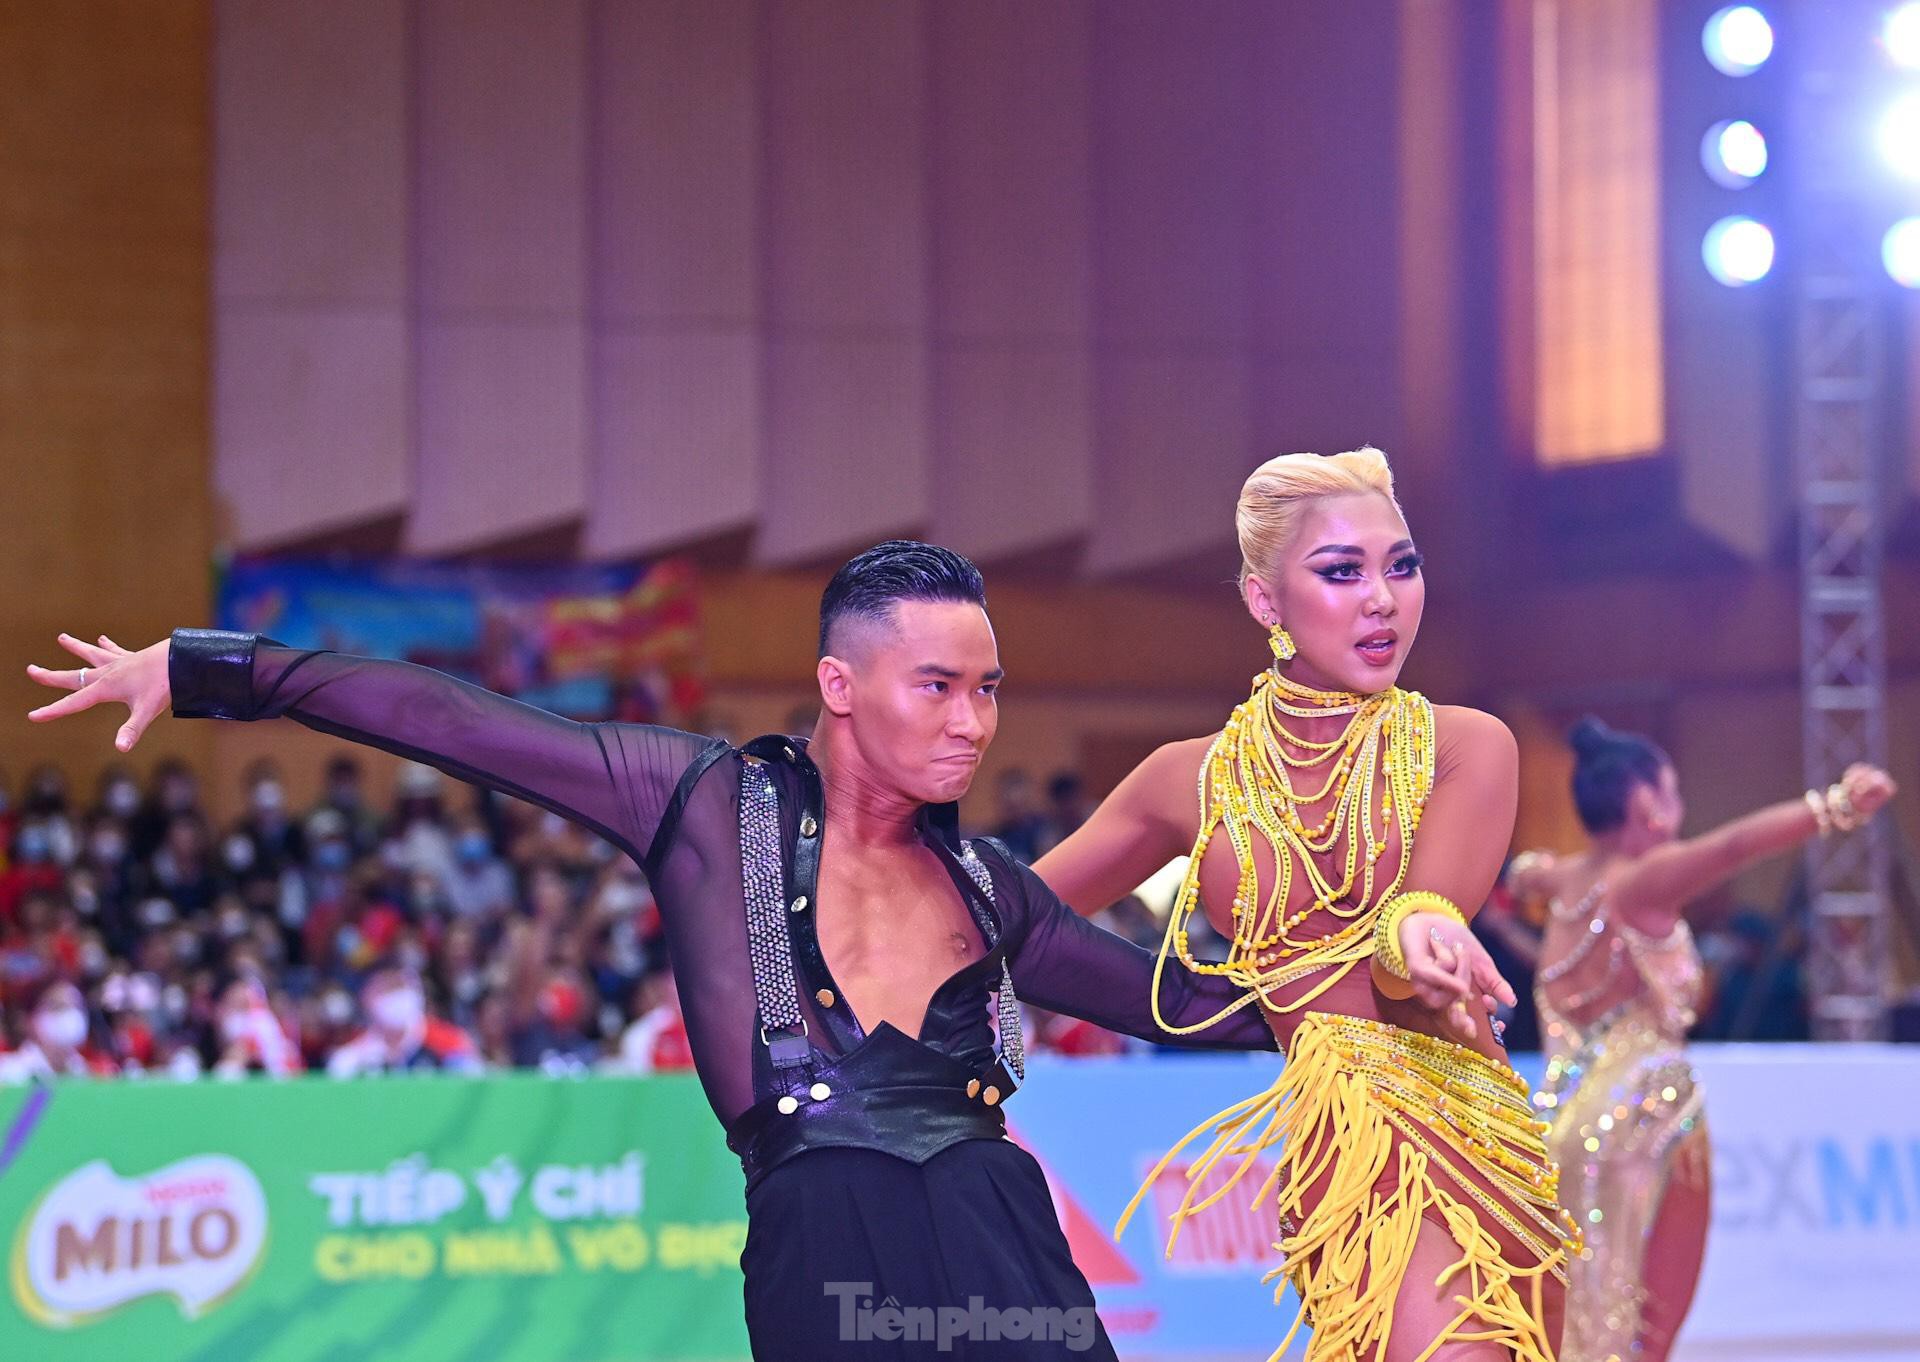 Watch the mesmerizing dance that helped Dancesport Vietnam win 5 gold medals at the 31st SEA Games - Photo 2.